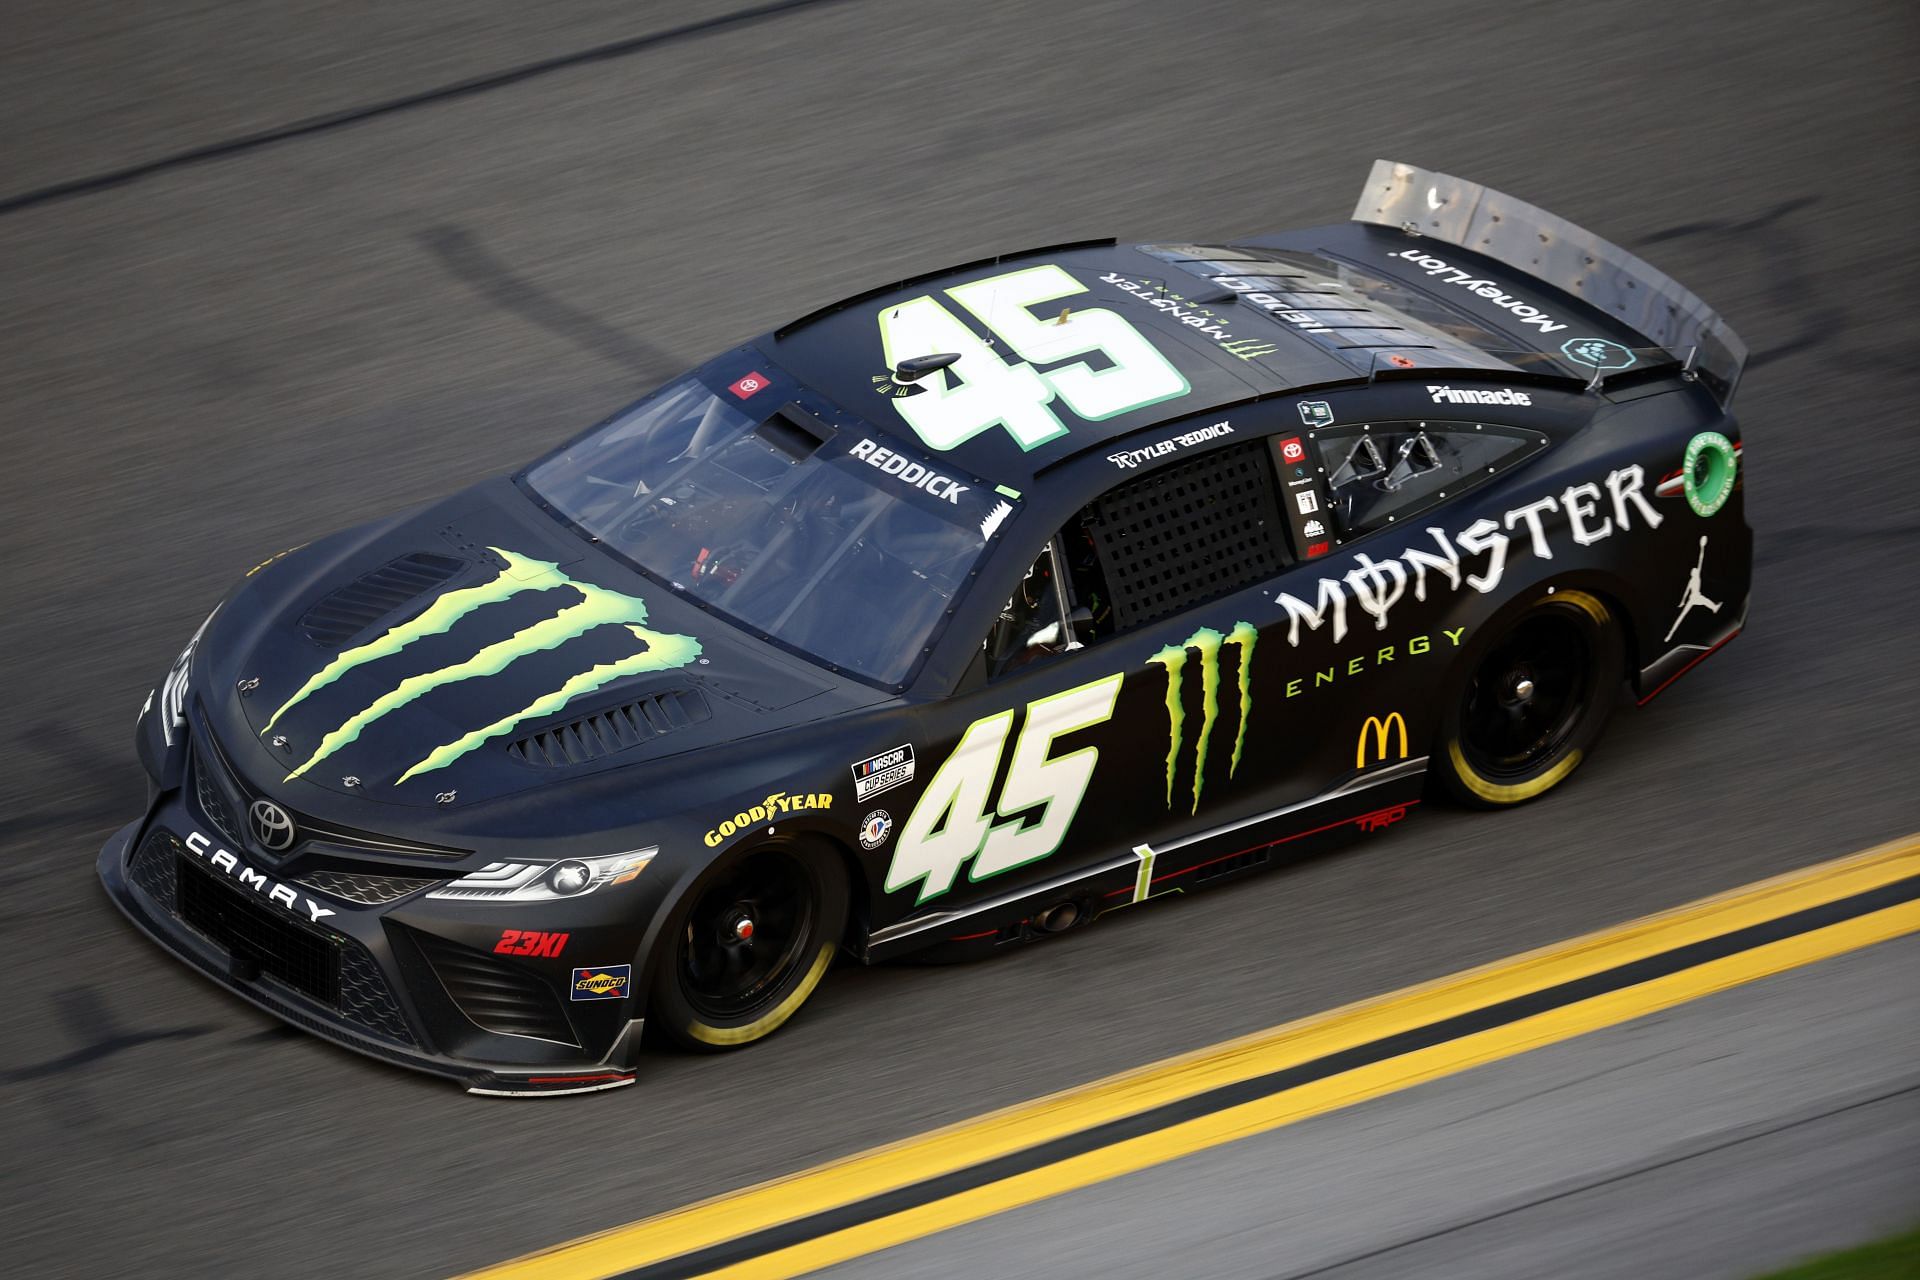 NASCAR driver Tyler Reddick to debut new Monster scheme at Auto Club